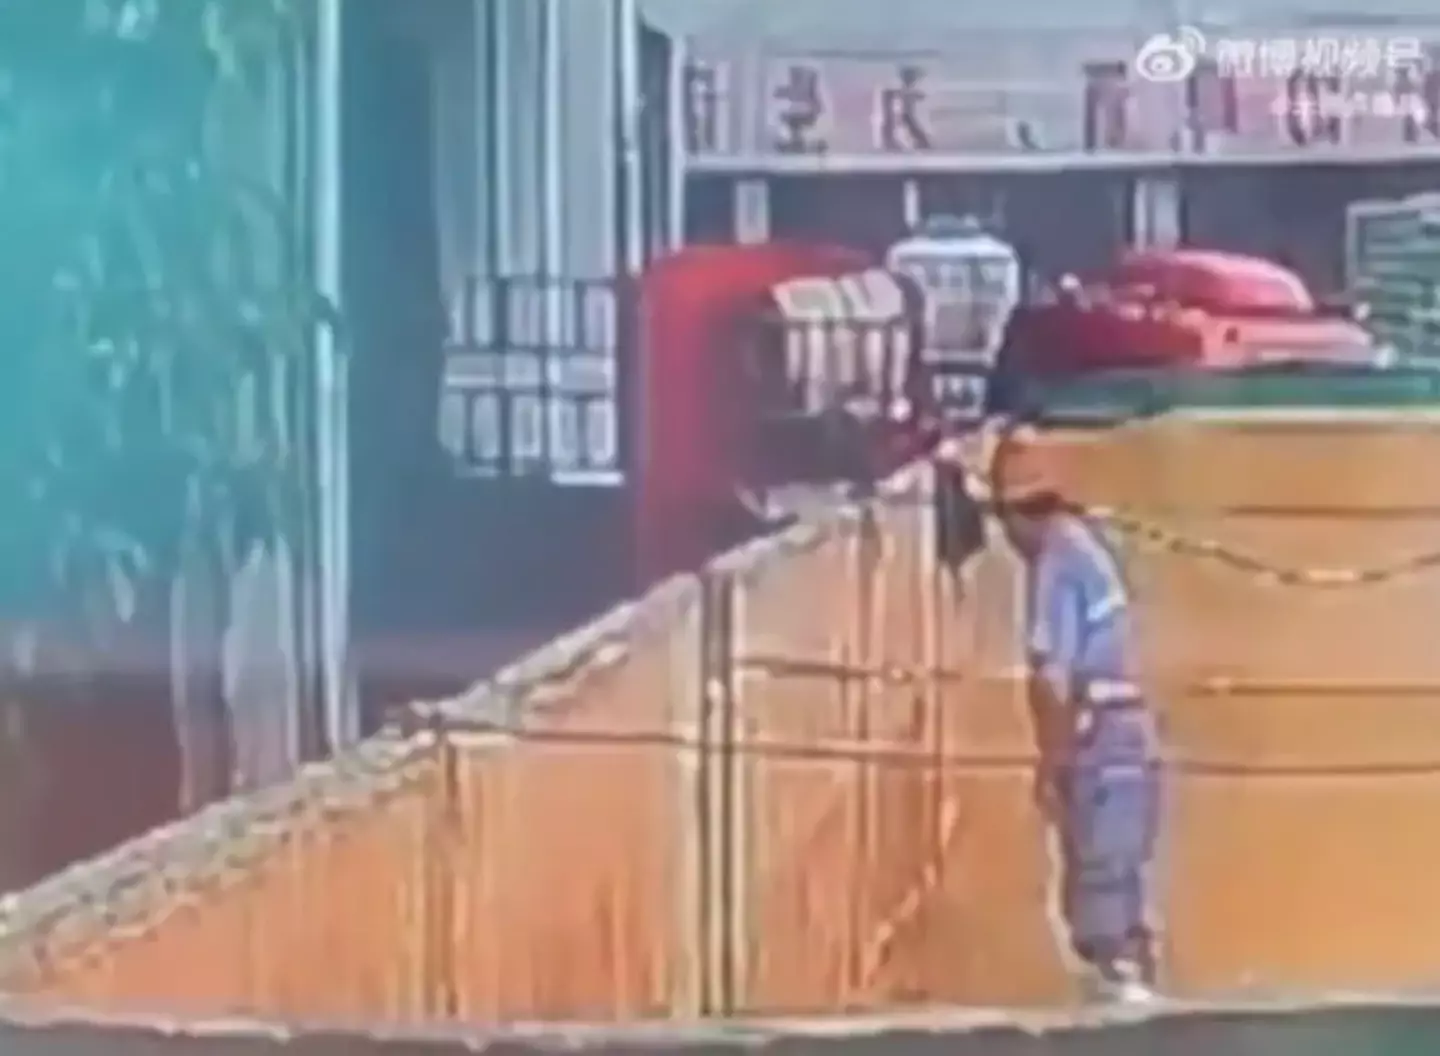 The man was filmed urinating into a vat at factory.